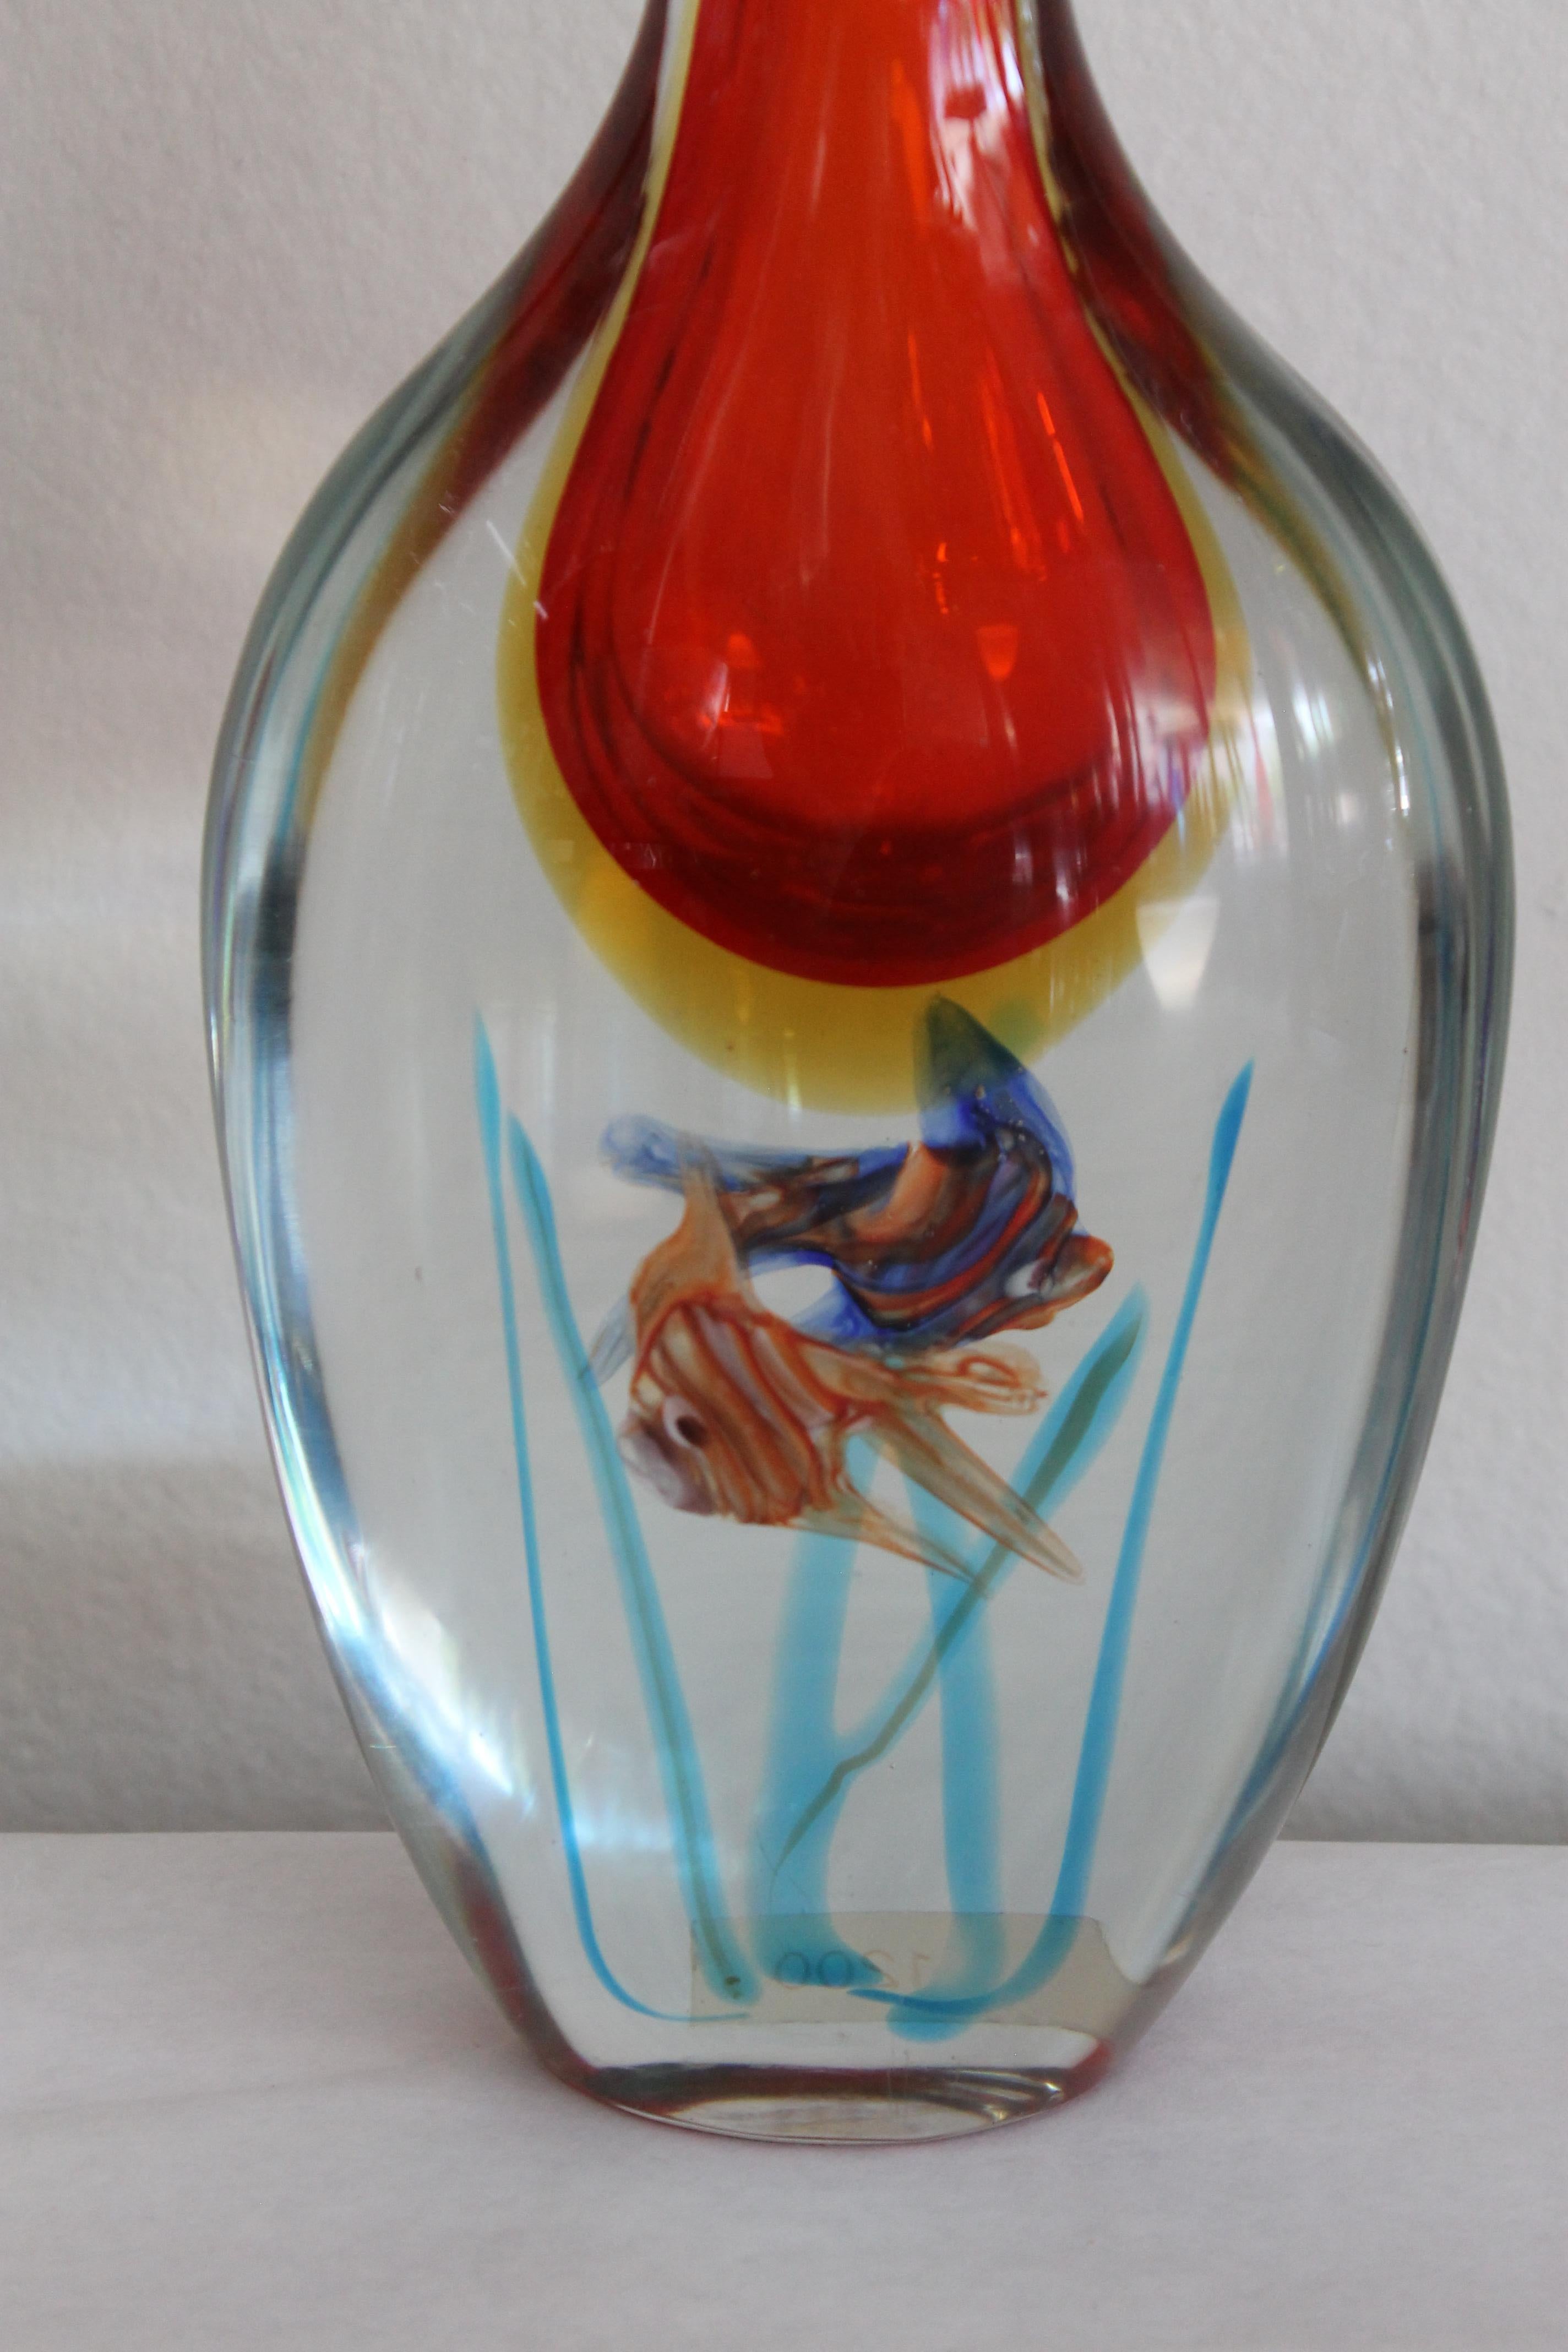 Murano hand blown fish vase infused with color attributed to Barbini.  Vase has a partial Murano label.  Vase measures 6.5